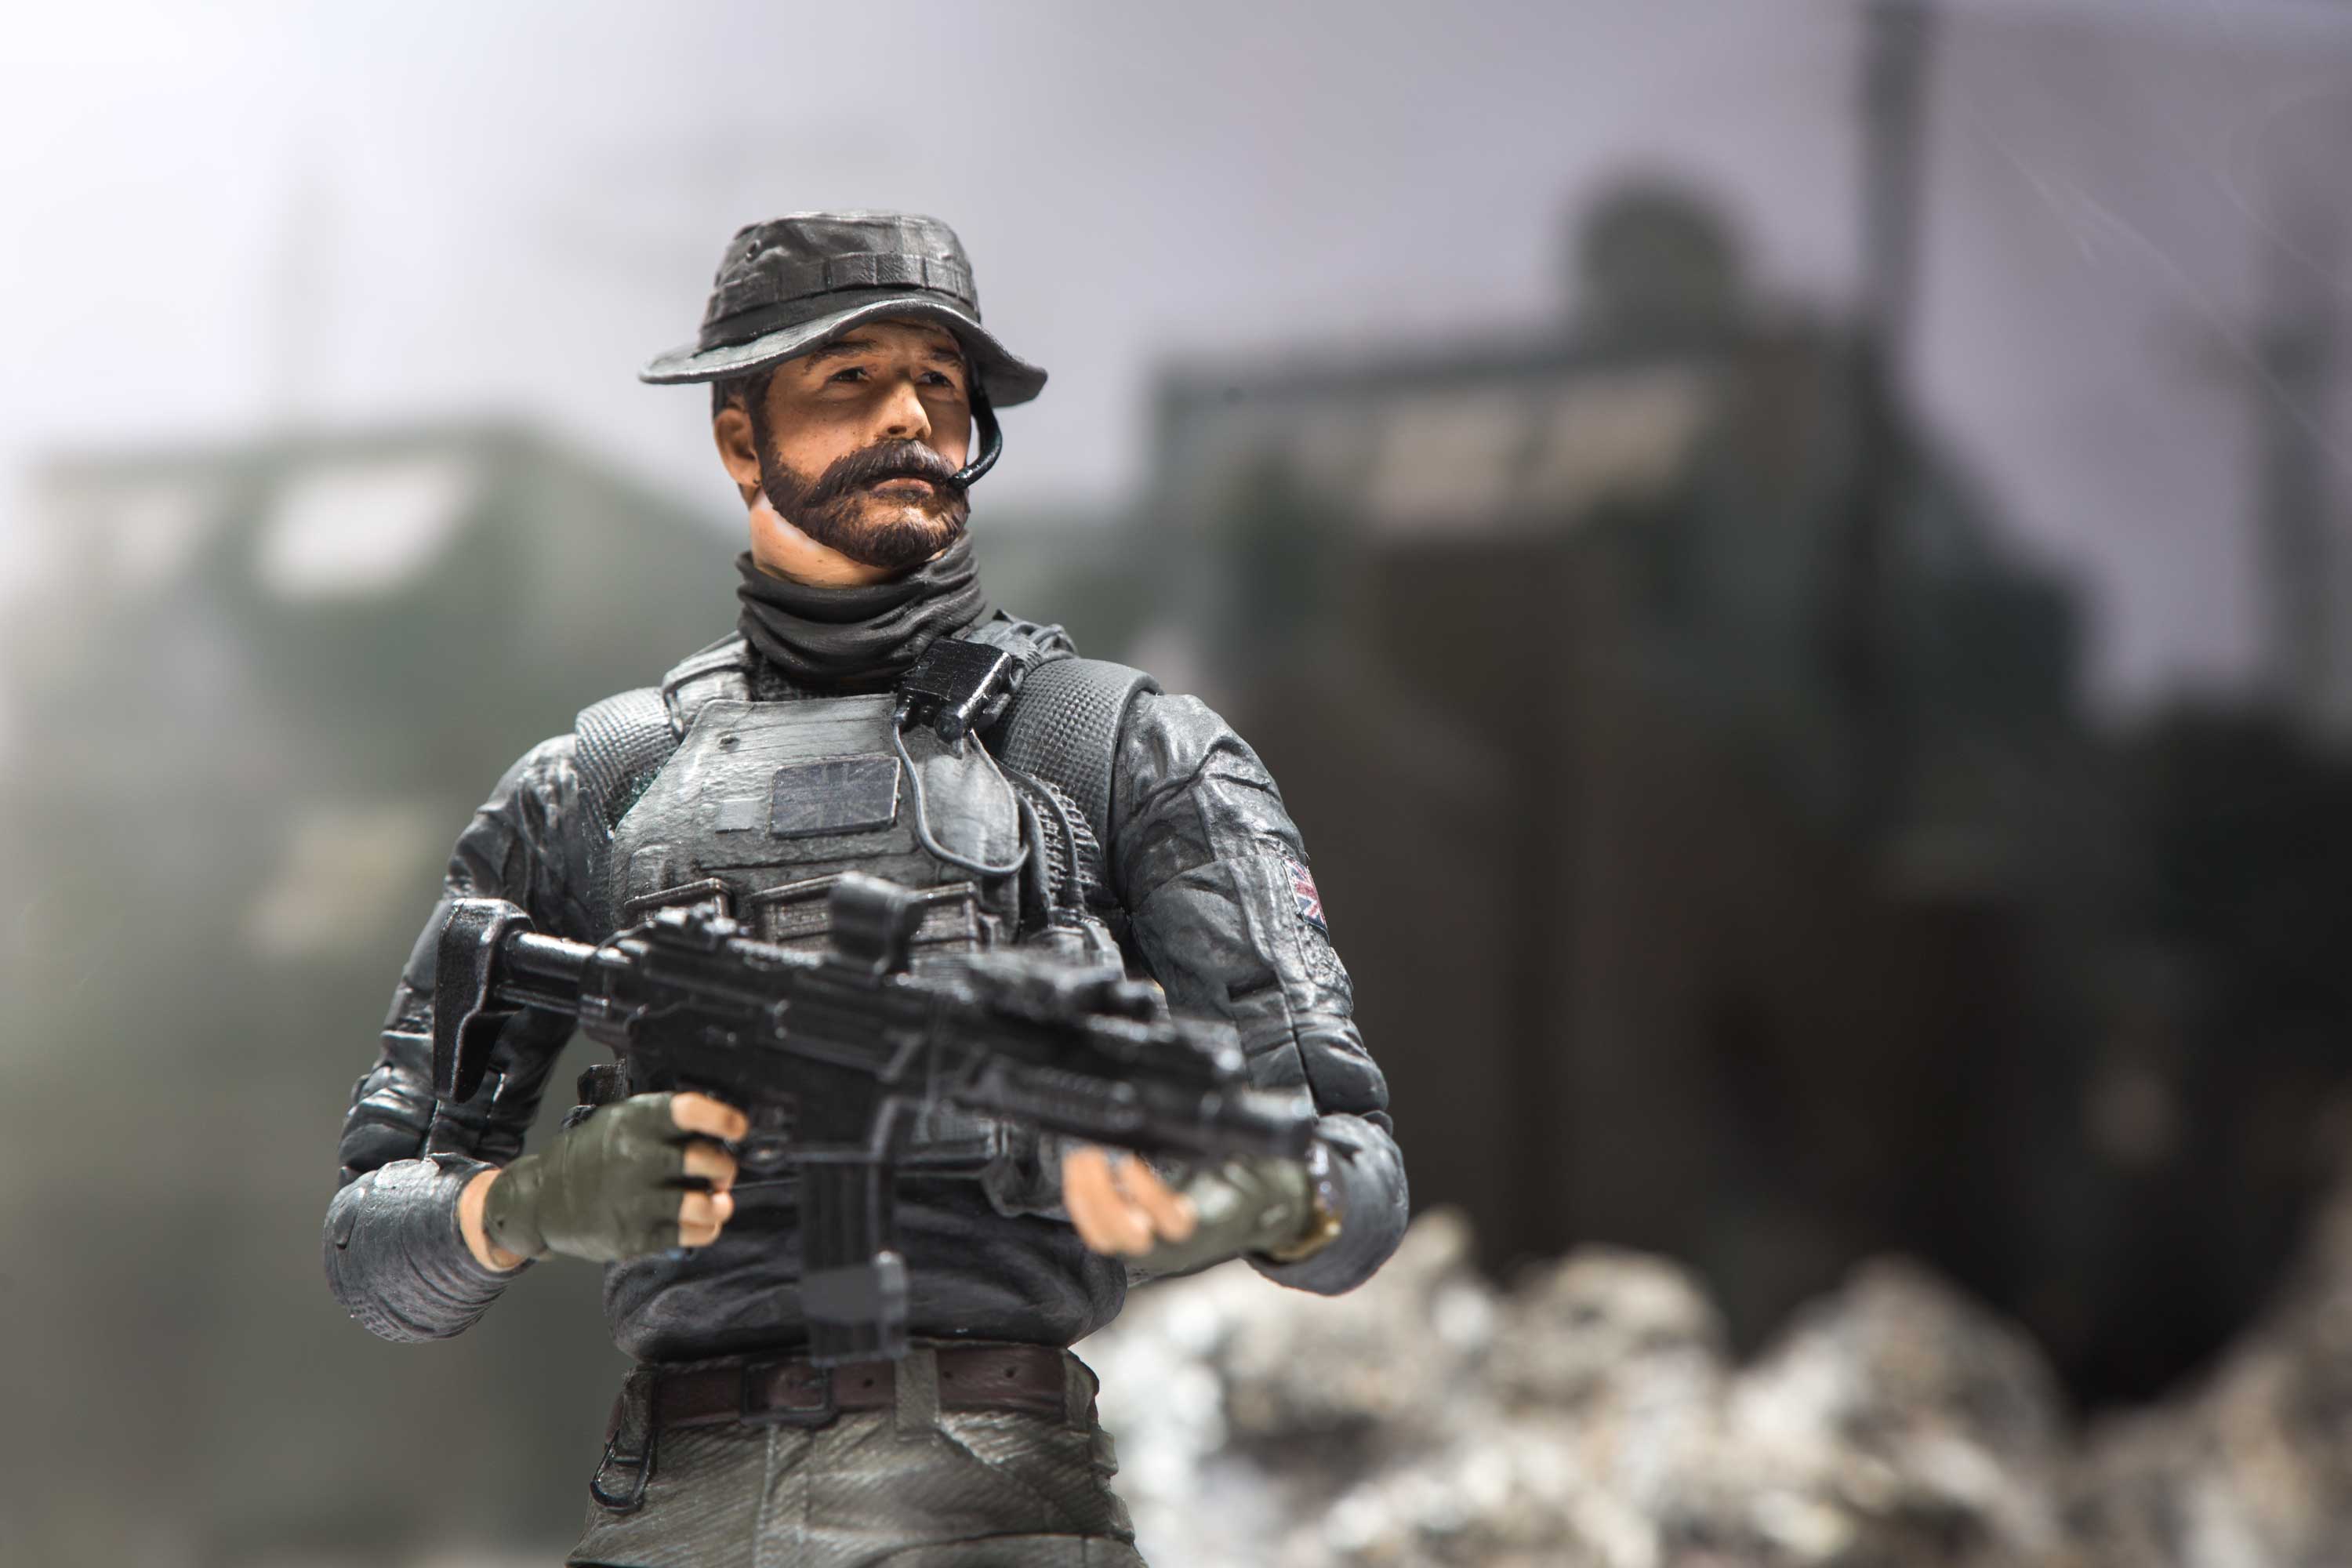 Call of duty warzone mobile на телефон. Call of Duty: Modern Warfare (2019). Call of Duty Modern Warfare 2019 Captain Price. Capitan Price Cod MW 2019. Captain Price MW 2019.